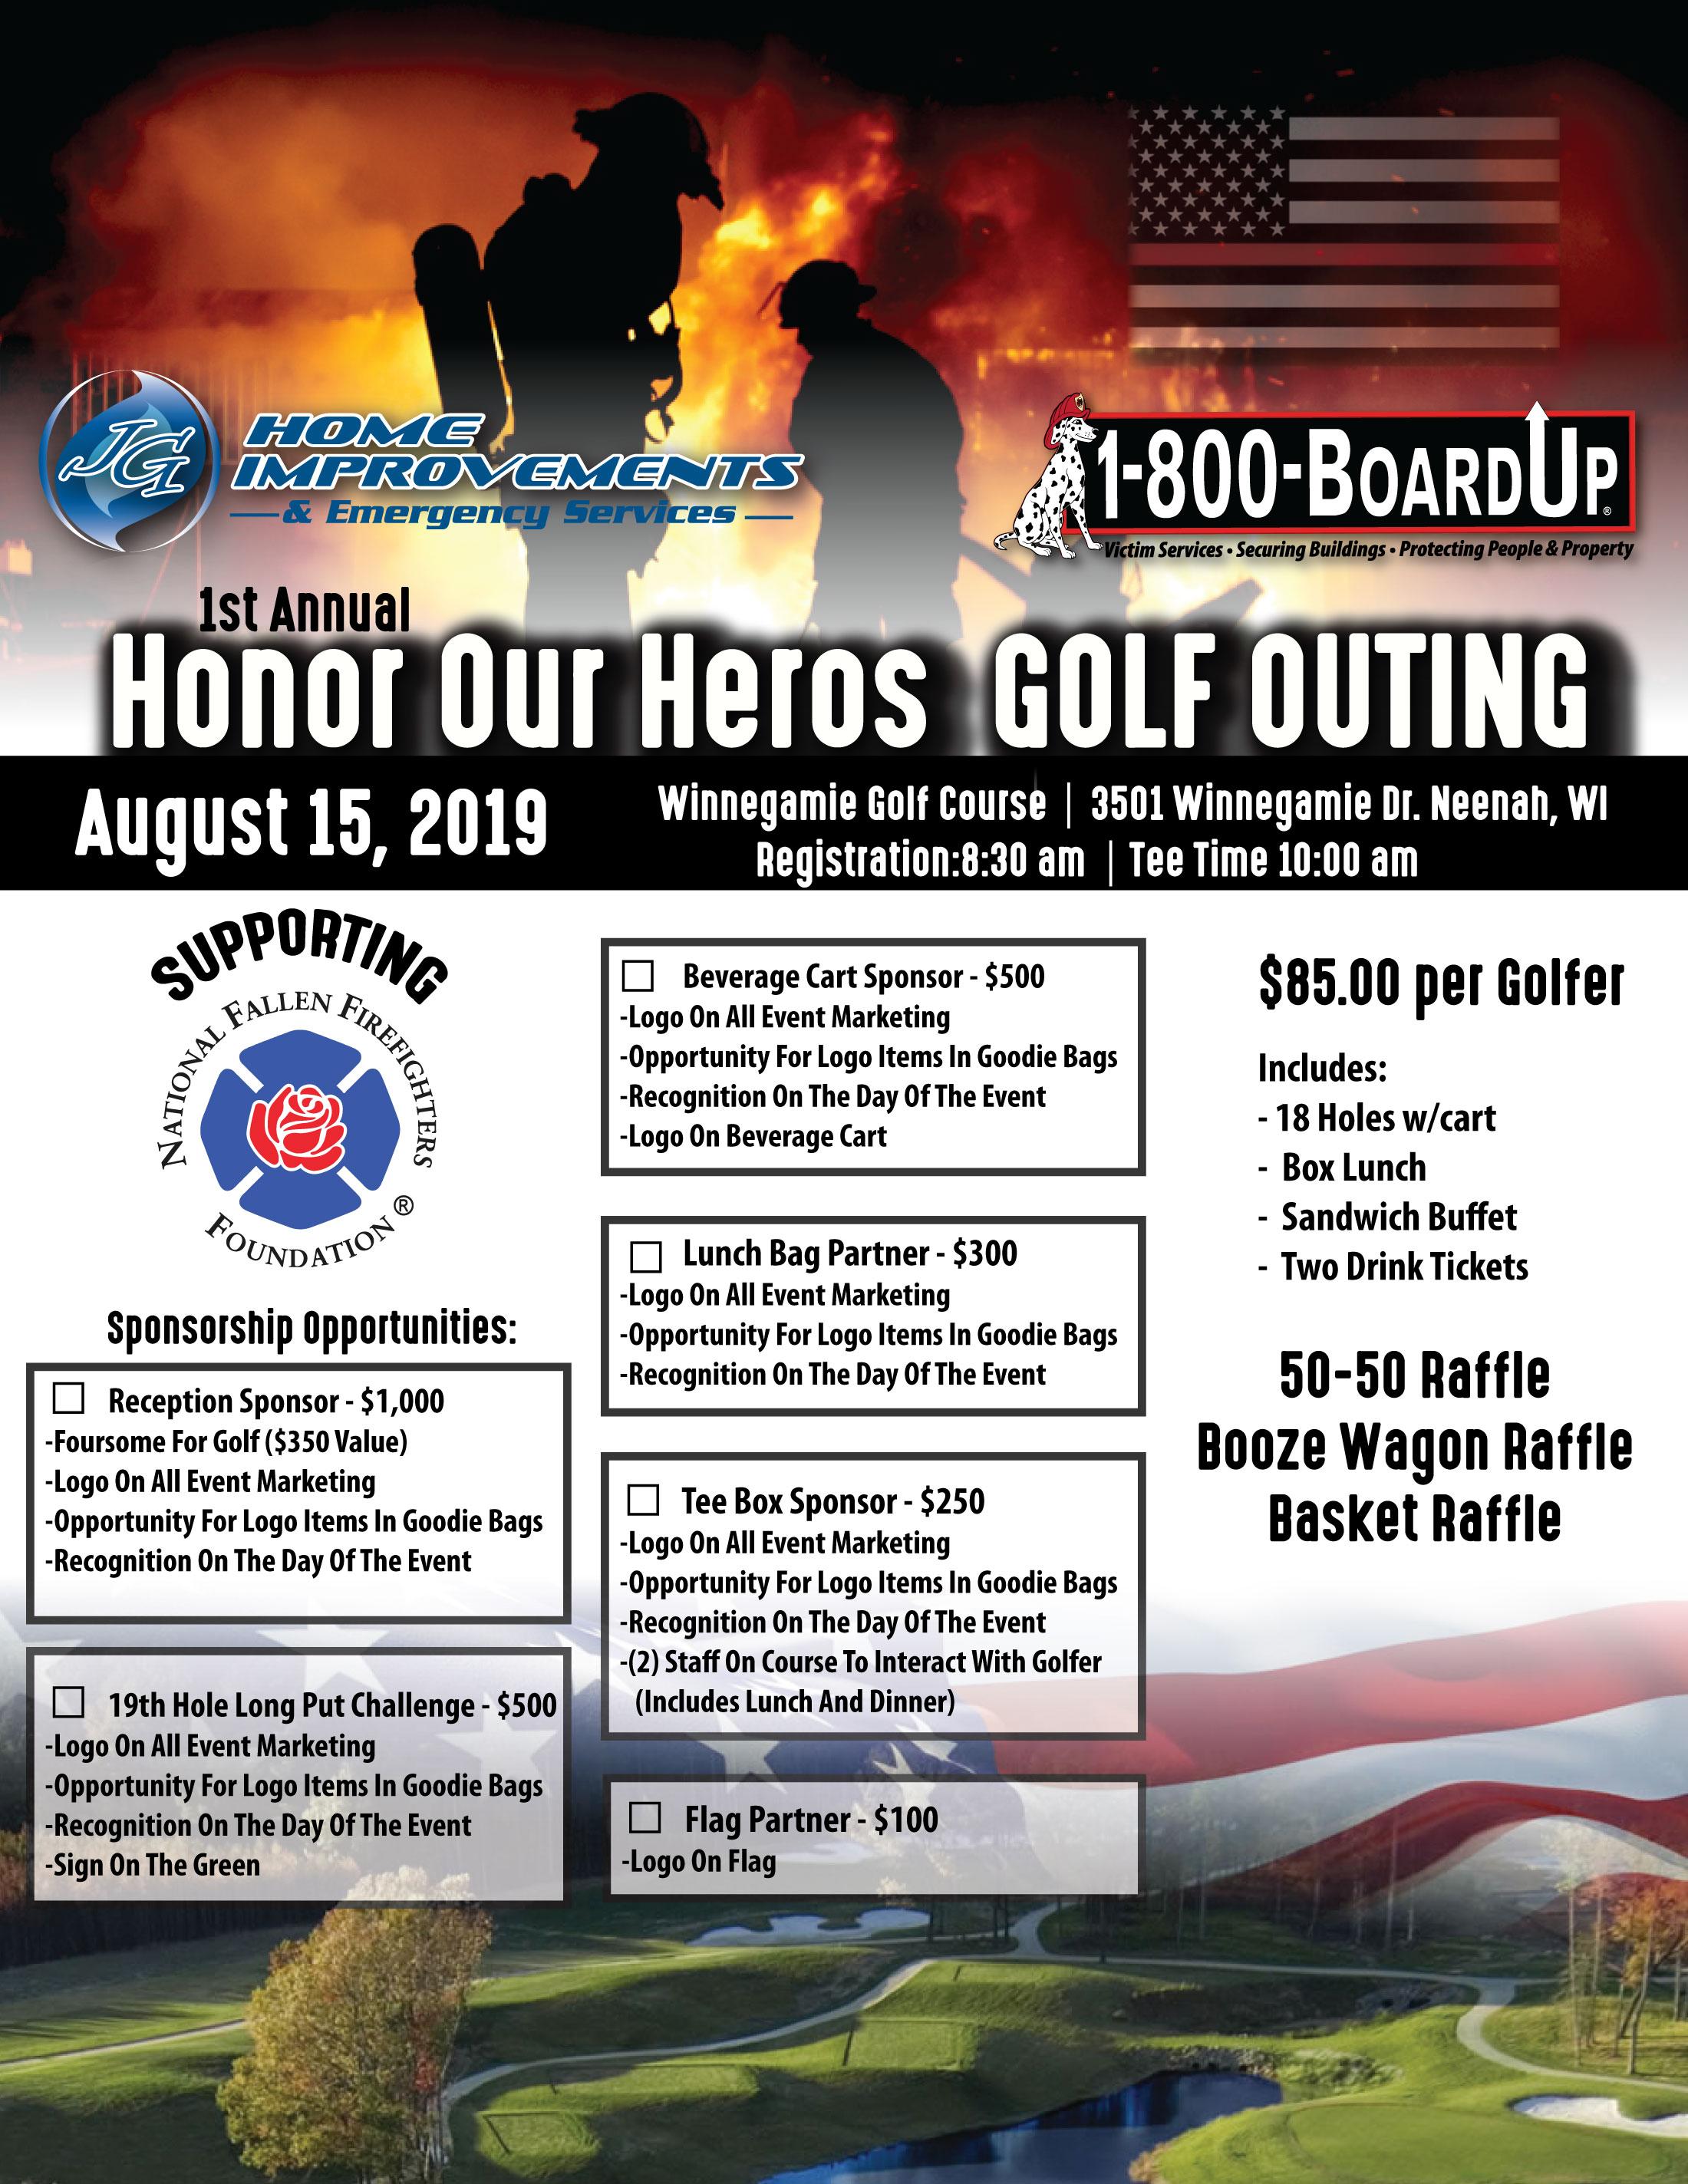 1st Annual Honor Our Heros Golf Outing